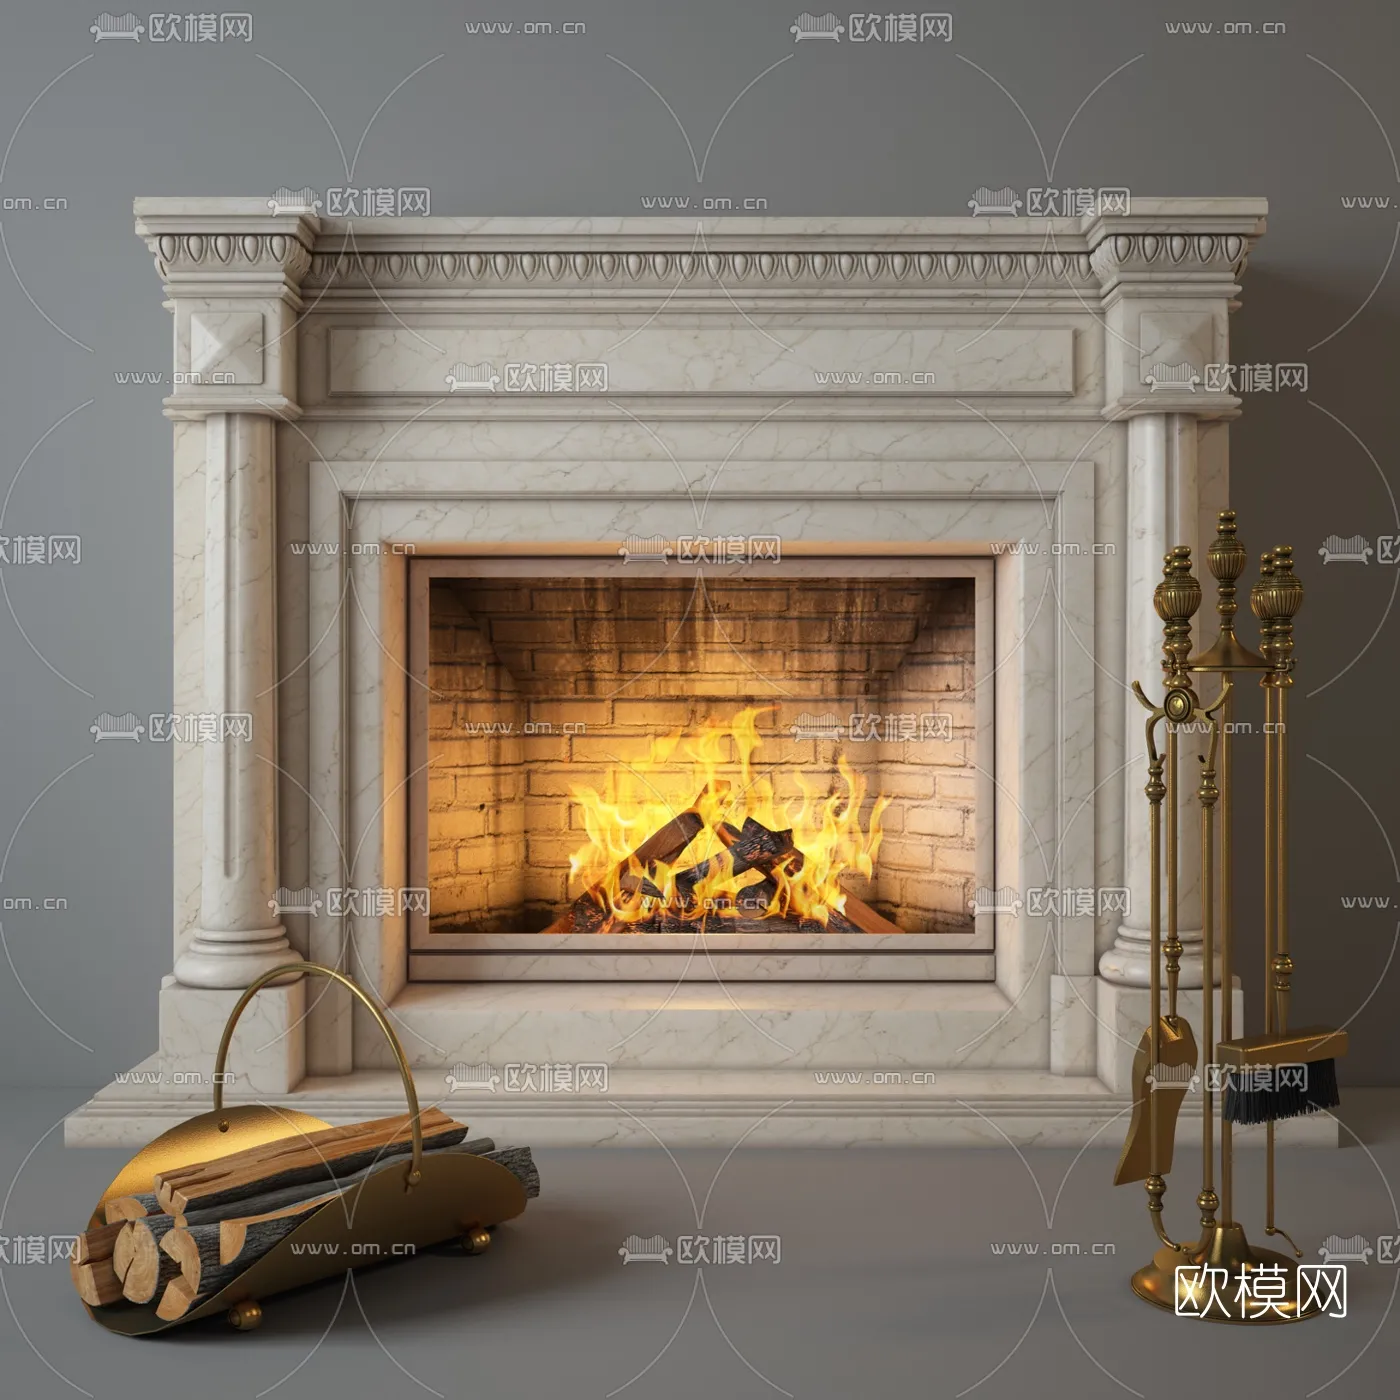 CLASSIC – FIREPLACE 3DMODELS – 047